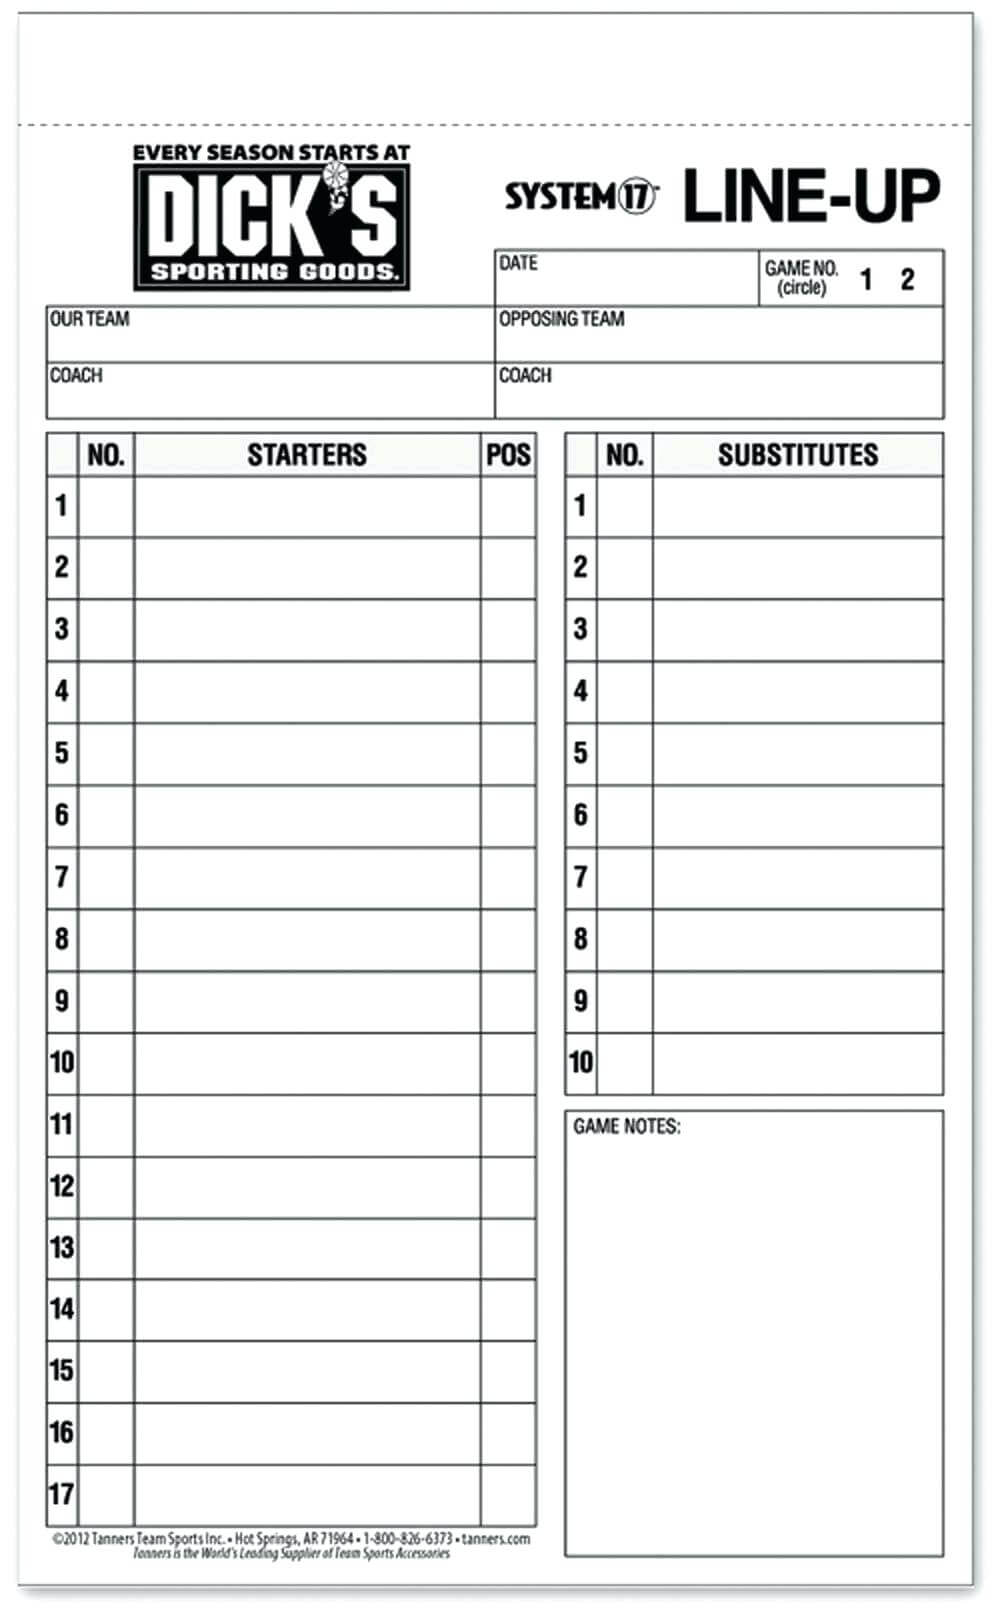 Softball Lineup Card Template - Cumed With Free Baseball Lineup Card Template